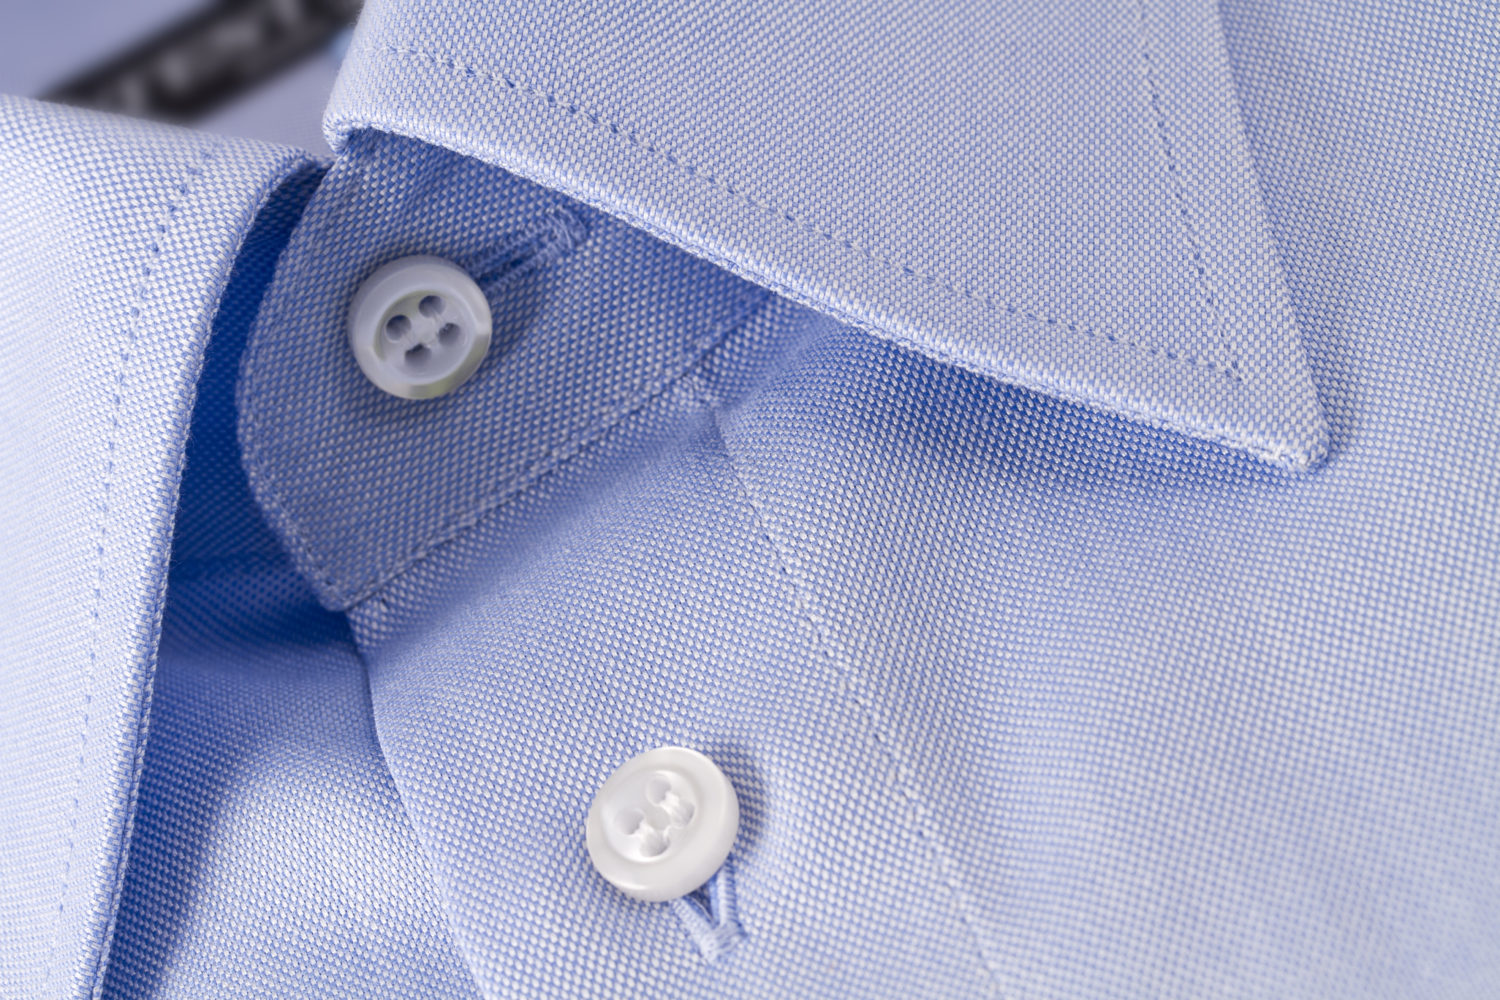 Here's Why Men's And Women's Shirt Buttons Are On Opposite Sides